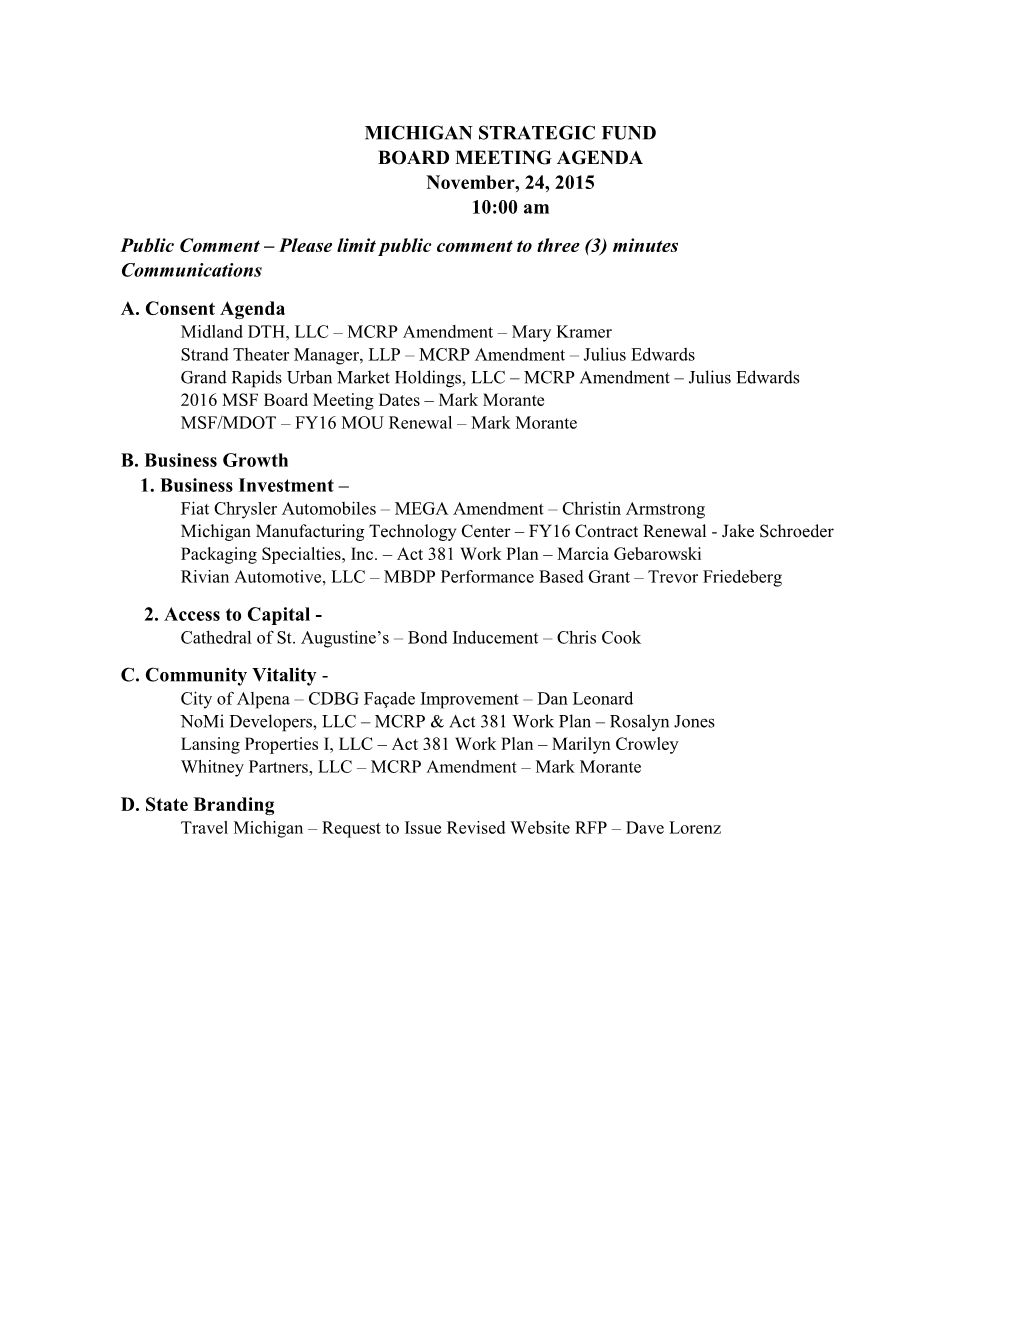 MICHIGAN STRATEGIC FUND BOARD MEETING AGENDA November, 24, 2015 10:00 Am Public Comment – Please Limit Public Comment to Three (3) Minutes Communications A